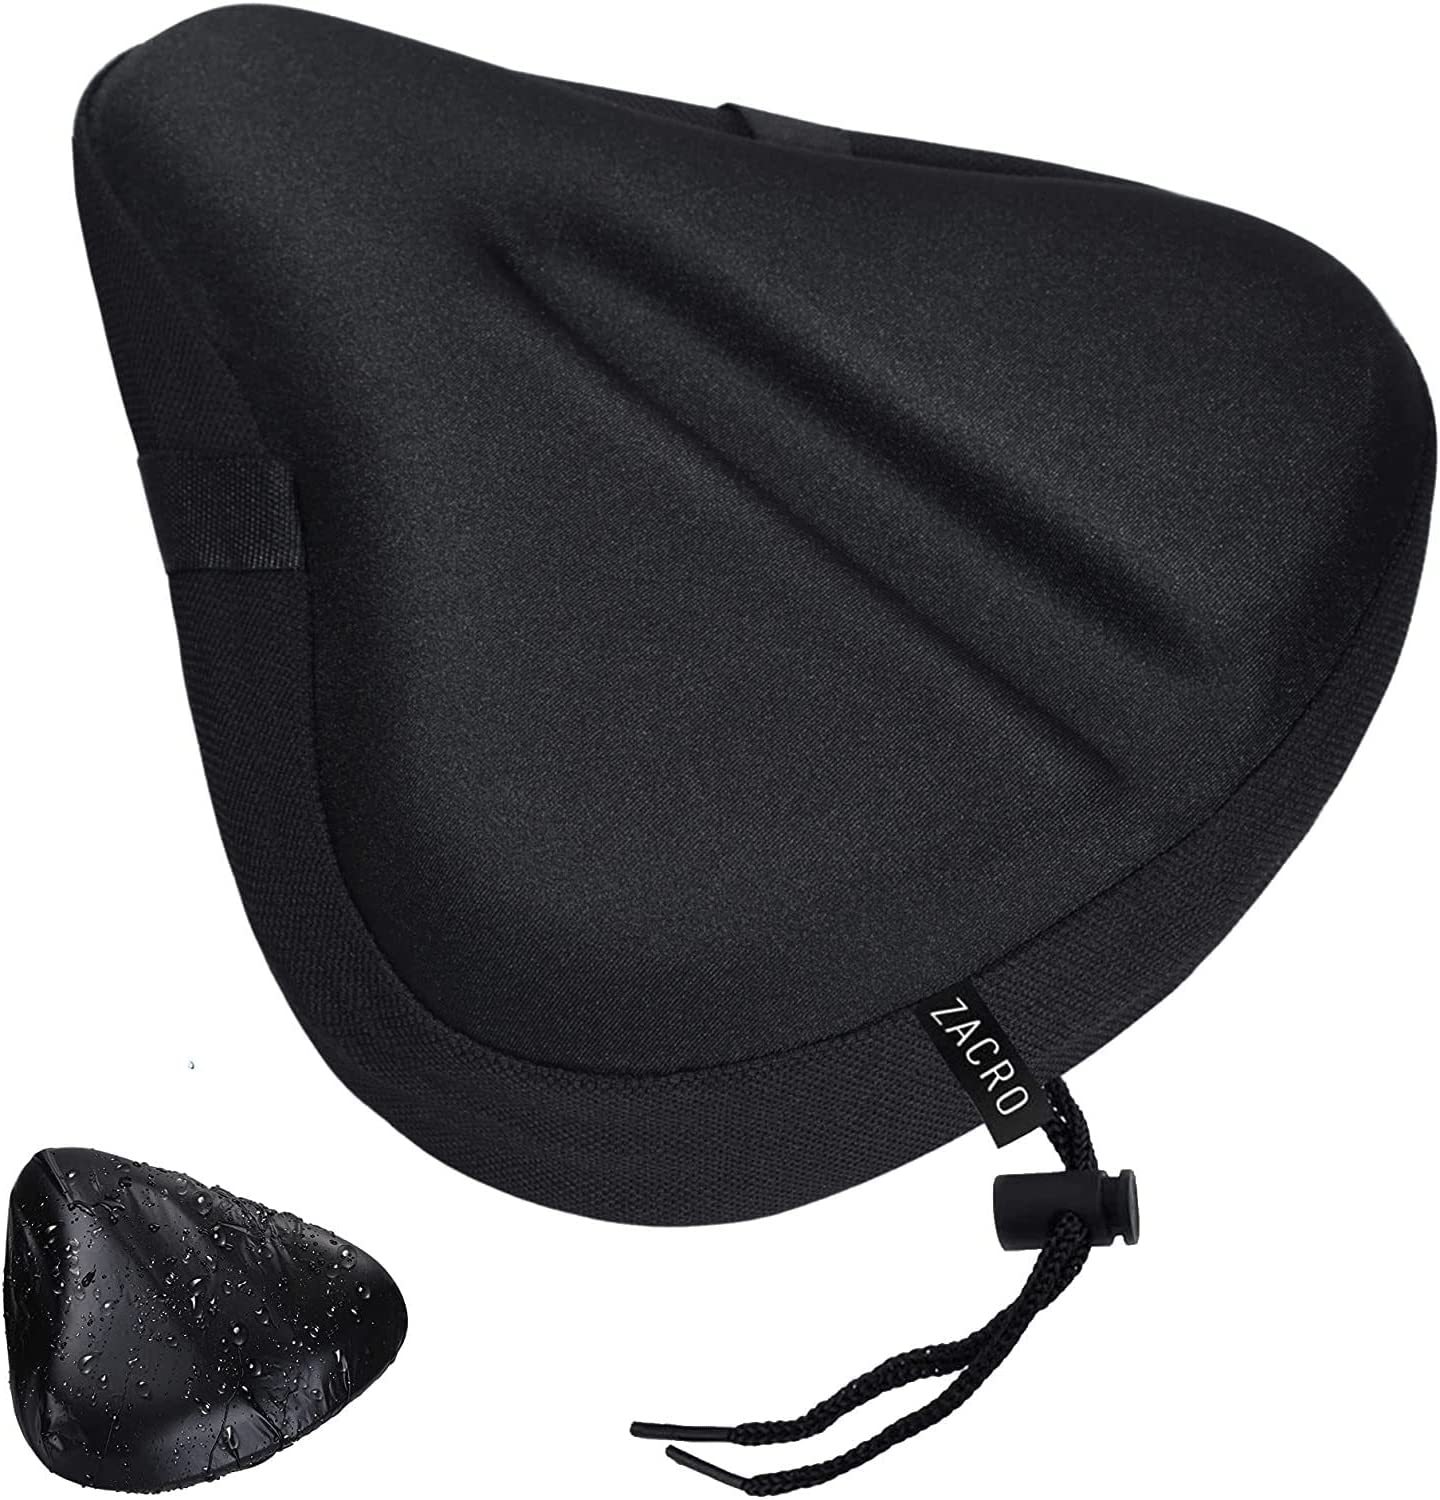 71tsQNb7YsL. AC SL1500  - Zacro Bike Seat Cushion - Gel Padded Wide Adjustable Cover for Men & Womens Comfort, Compatible with Peloton, Stationary Exercise or Cruiser Bicycle Seats, 11.4in X 10.4in, Water&Dust Resistant Cover